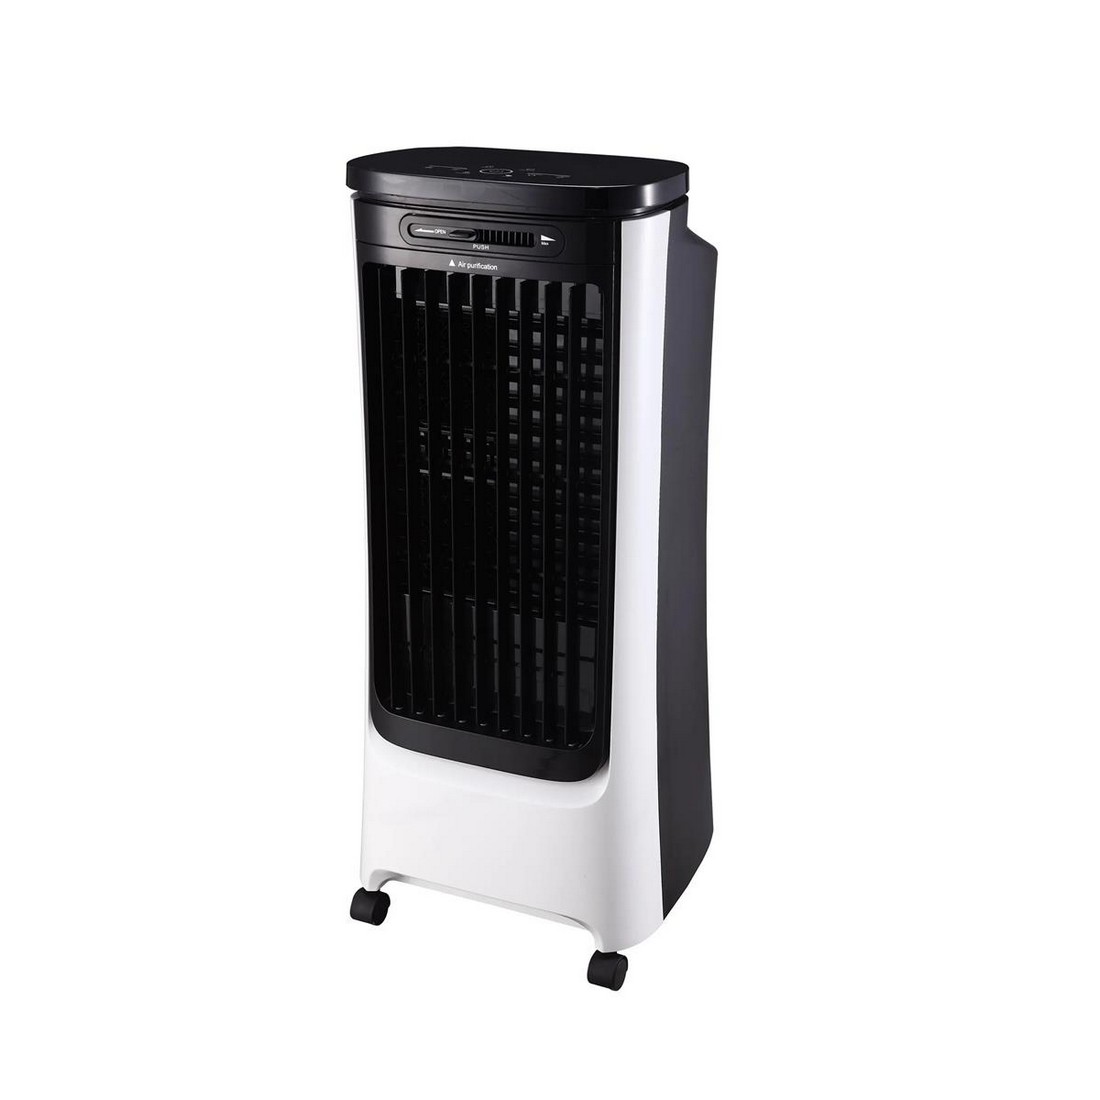 AC-40 AIR COOLER - Up to 120 m3